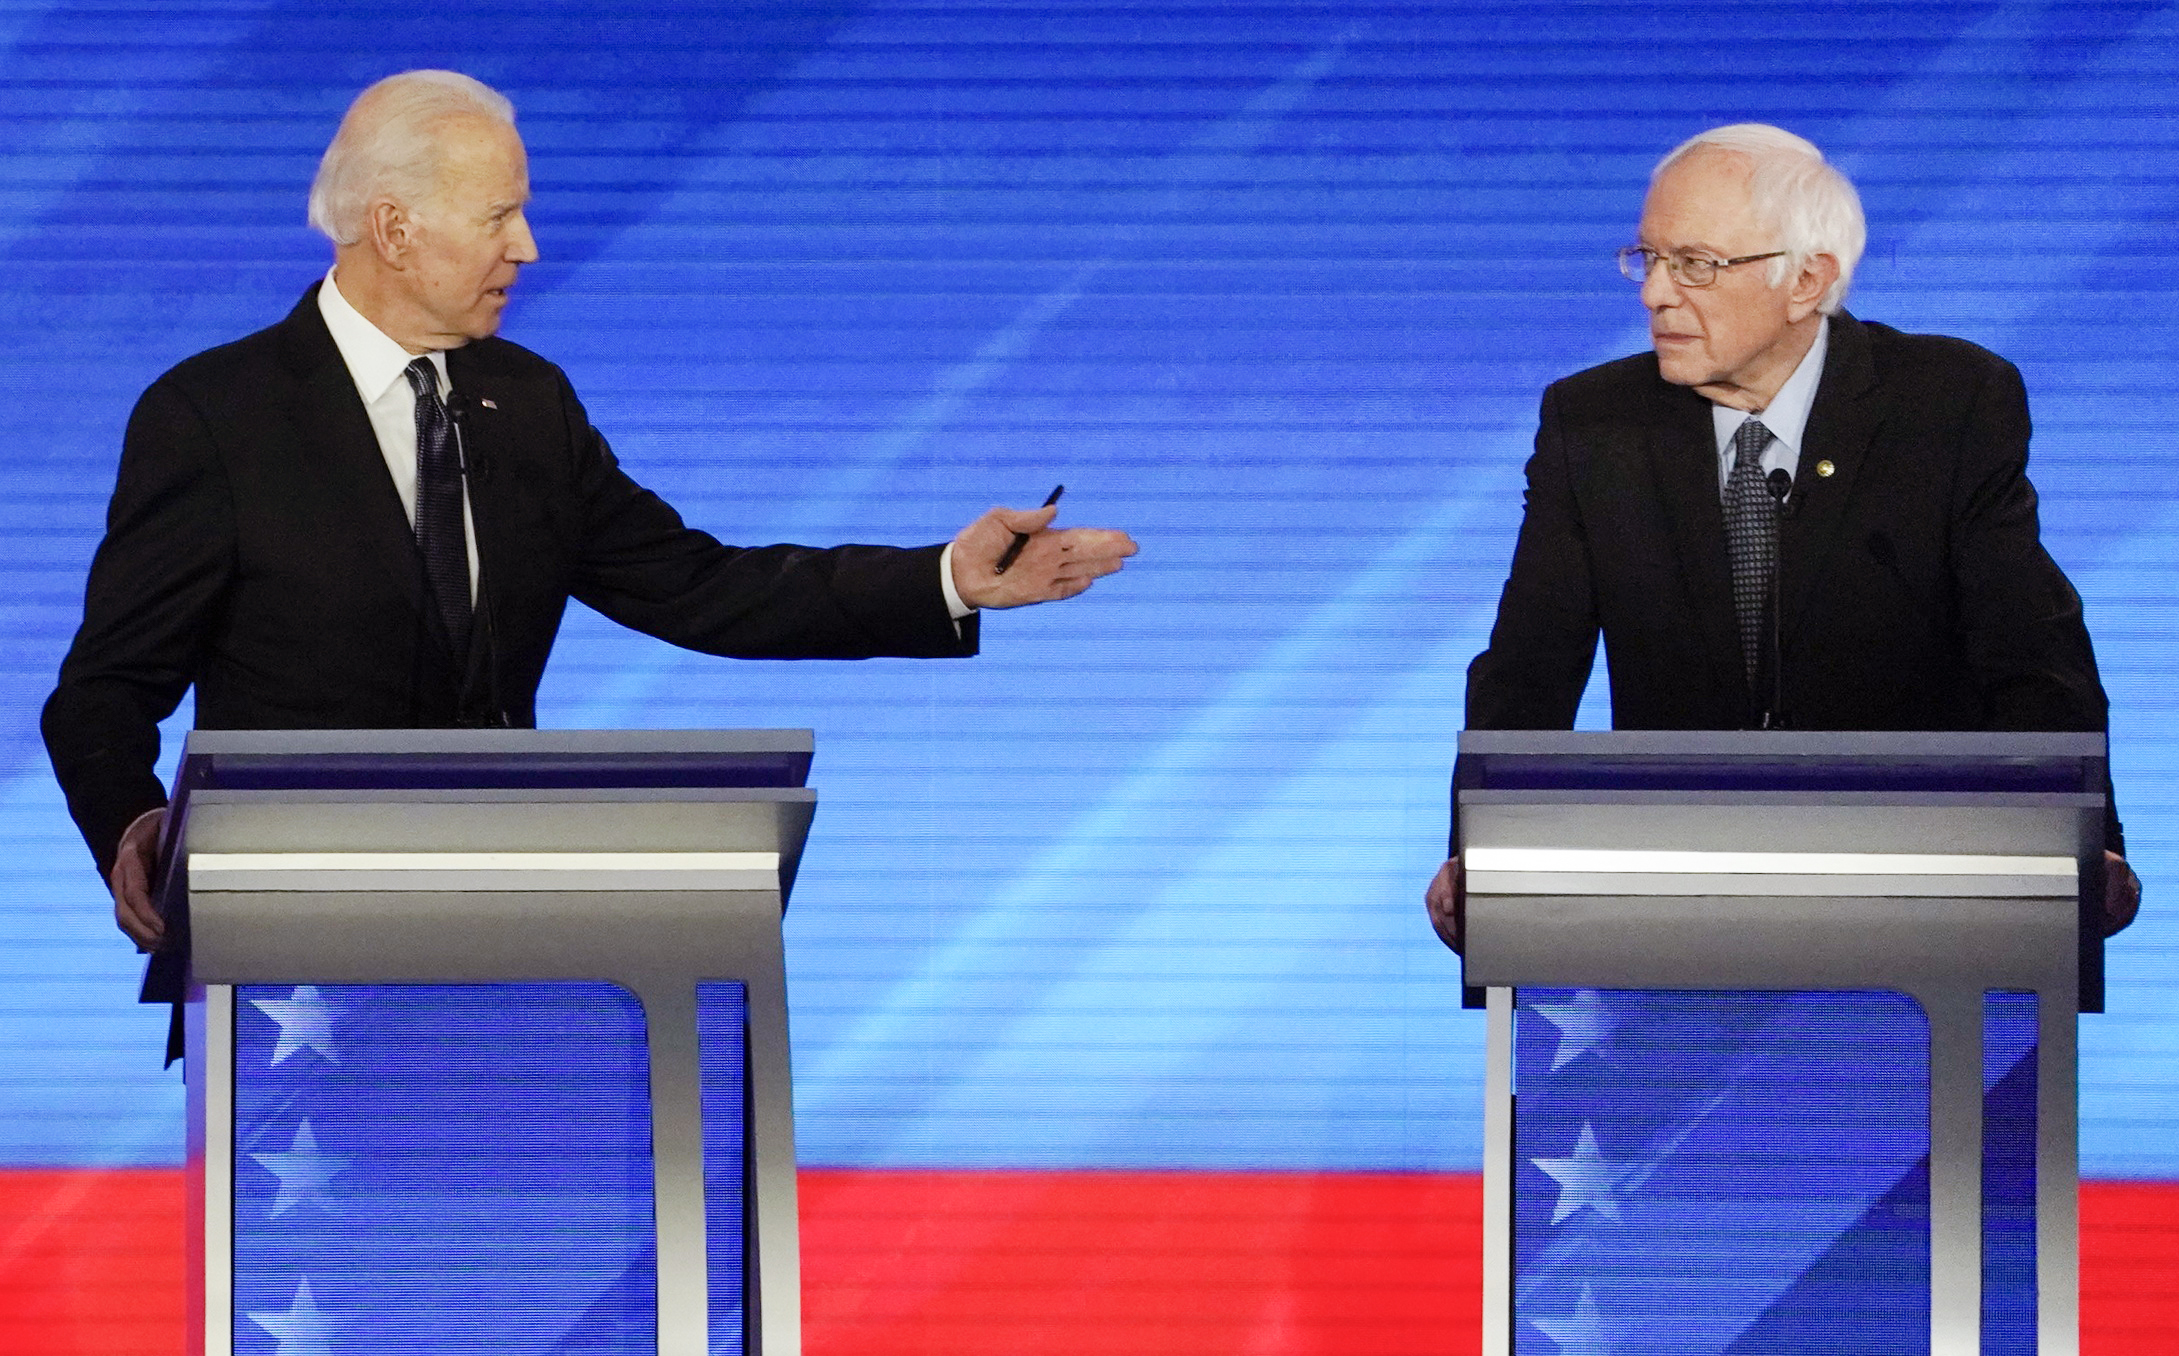 PHOTO: Democratic 2020 U.S. presidential candidate and former Vice President Joe Biden gestures towards Senator Bernie Sanders during the eighth Democratic 2020 presidential debate at Saint Anselm College in Manchester, New Hampshire, February 7, 2020.